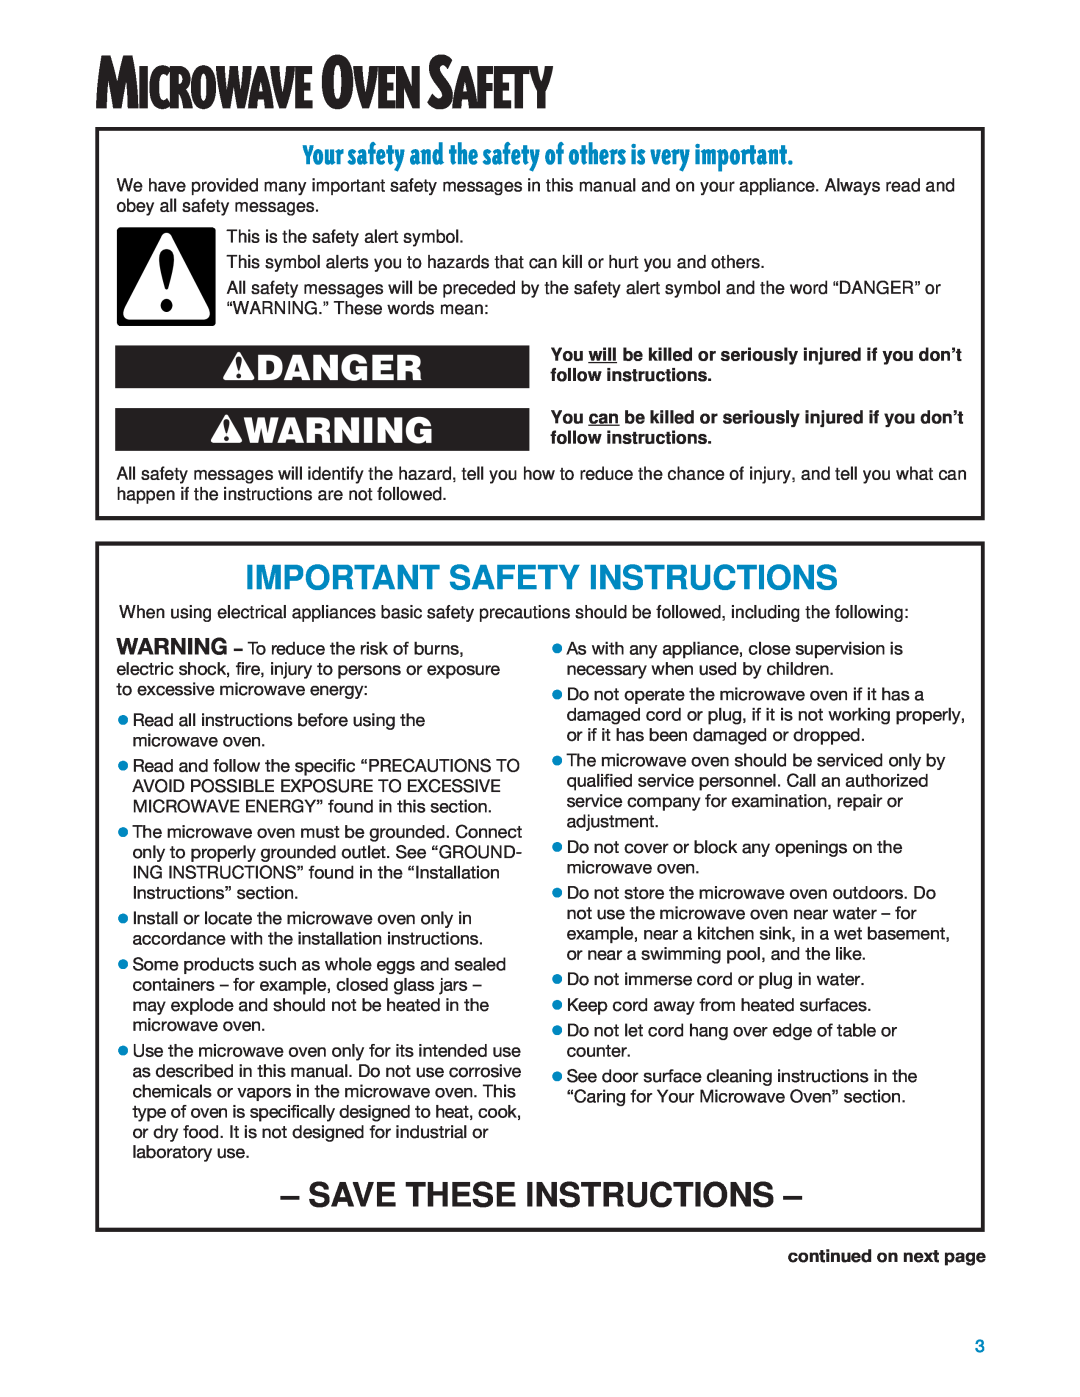 Whirlpool MT1195SG Important Safety Instructions, Save These Instructions, Microwave Oven Safety, wDANGER wWARNING 